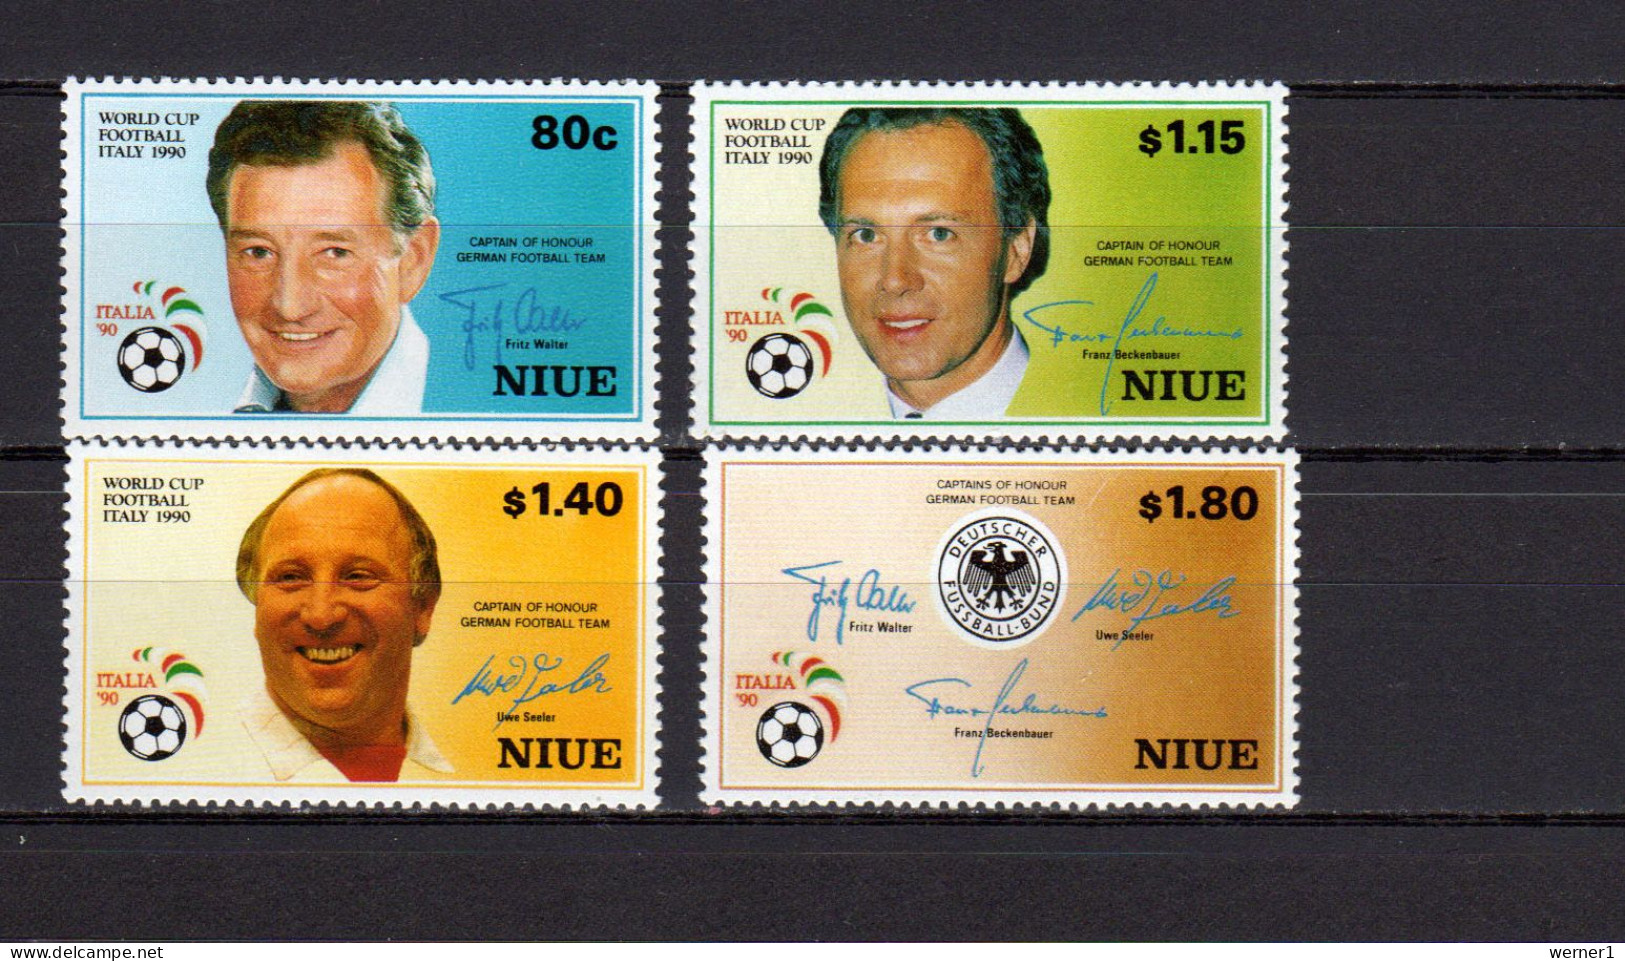 Niue 1990 Football Soccer World Cup Set Of 4 MNH - 1990 – Italy